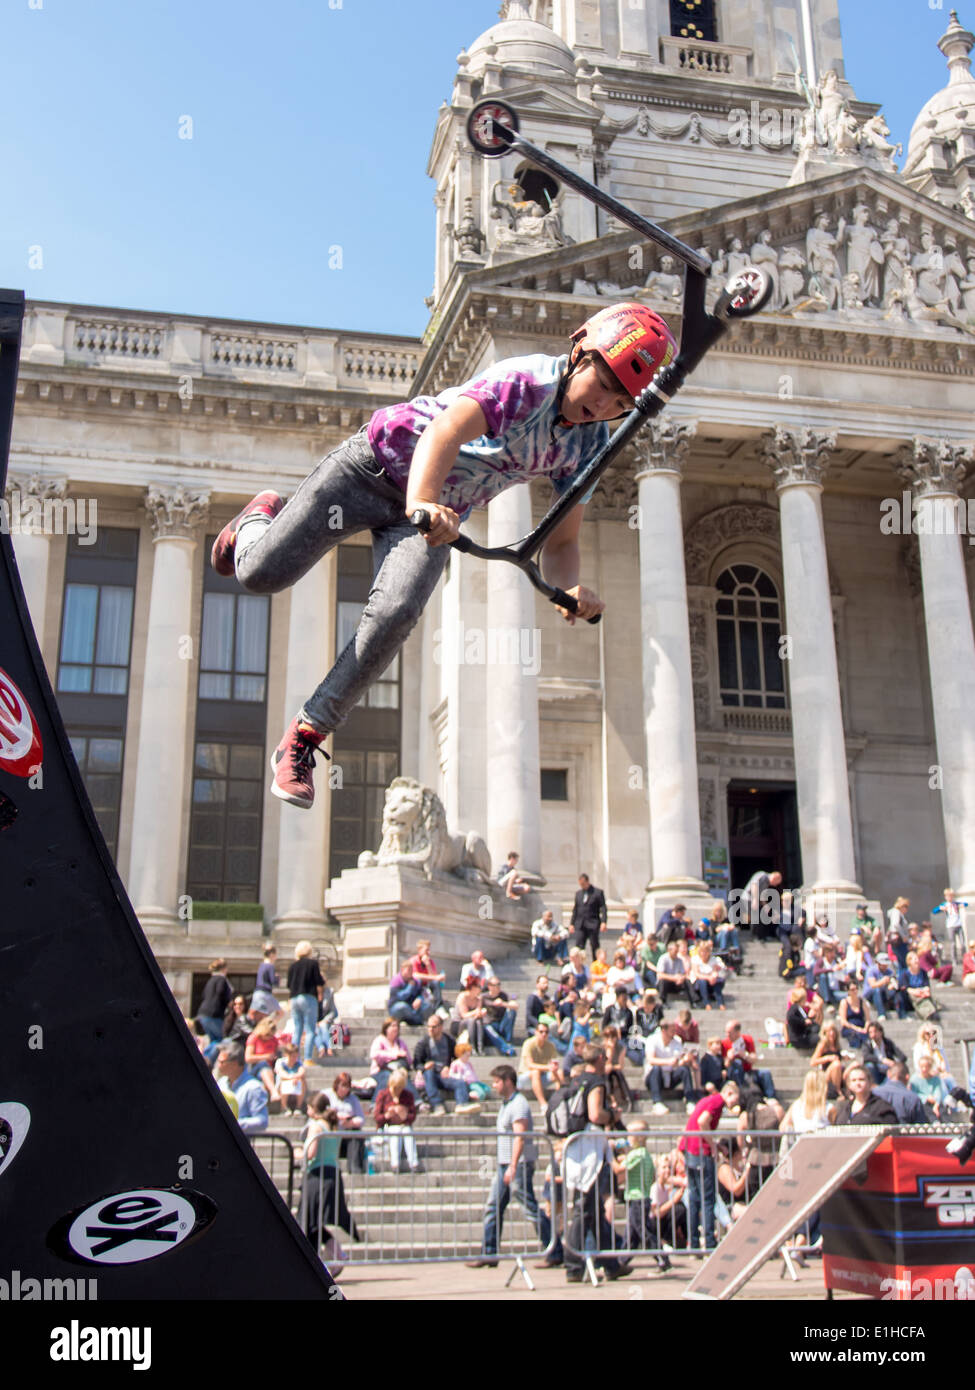 A scooter rider performs an aerial stunt in front of the Portsmouth Guildhall during the Portsmouth street games 2014 Stock Photo